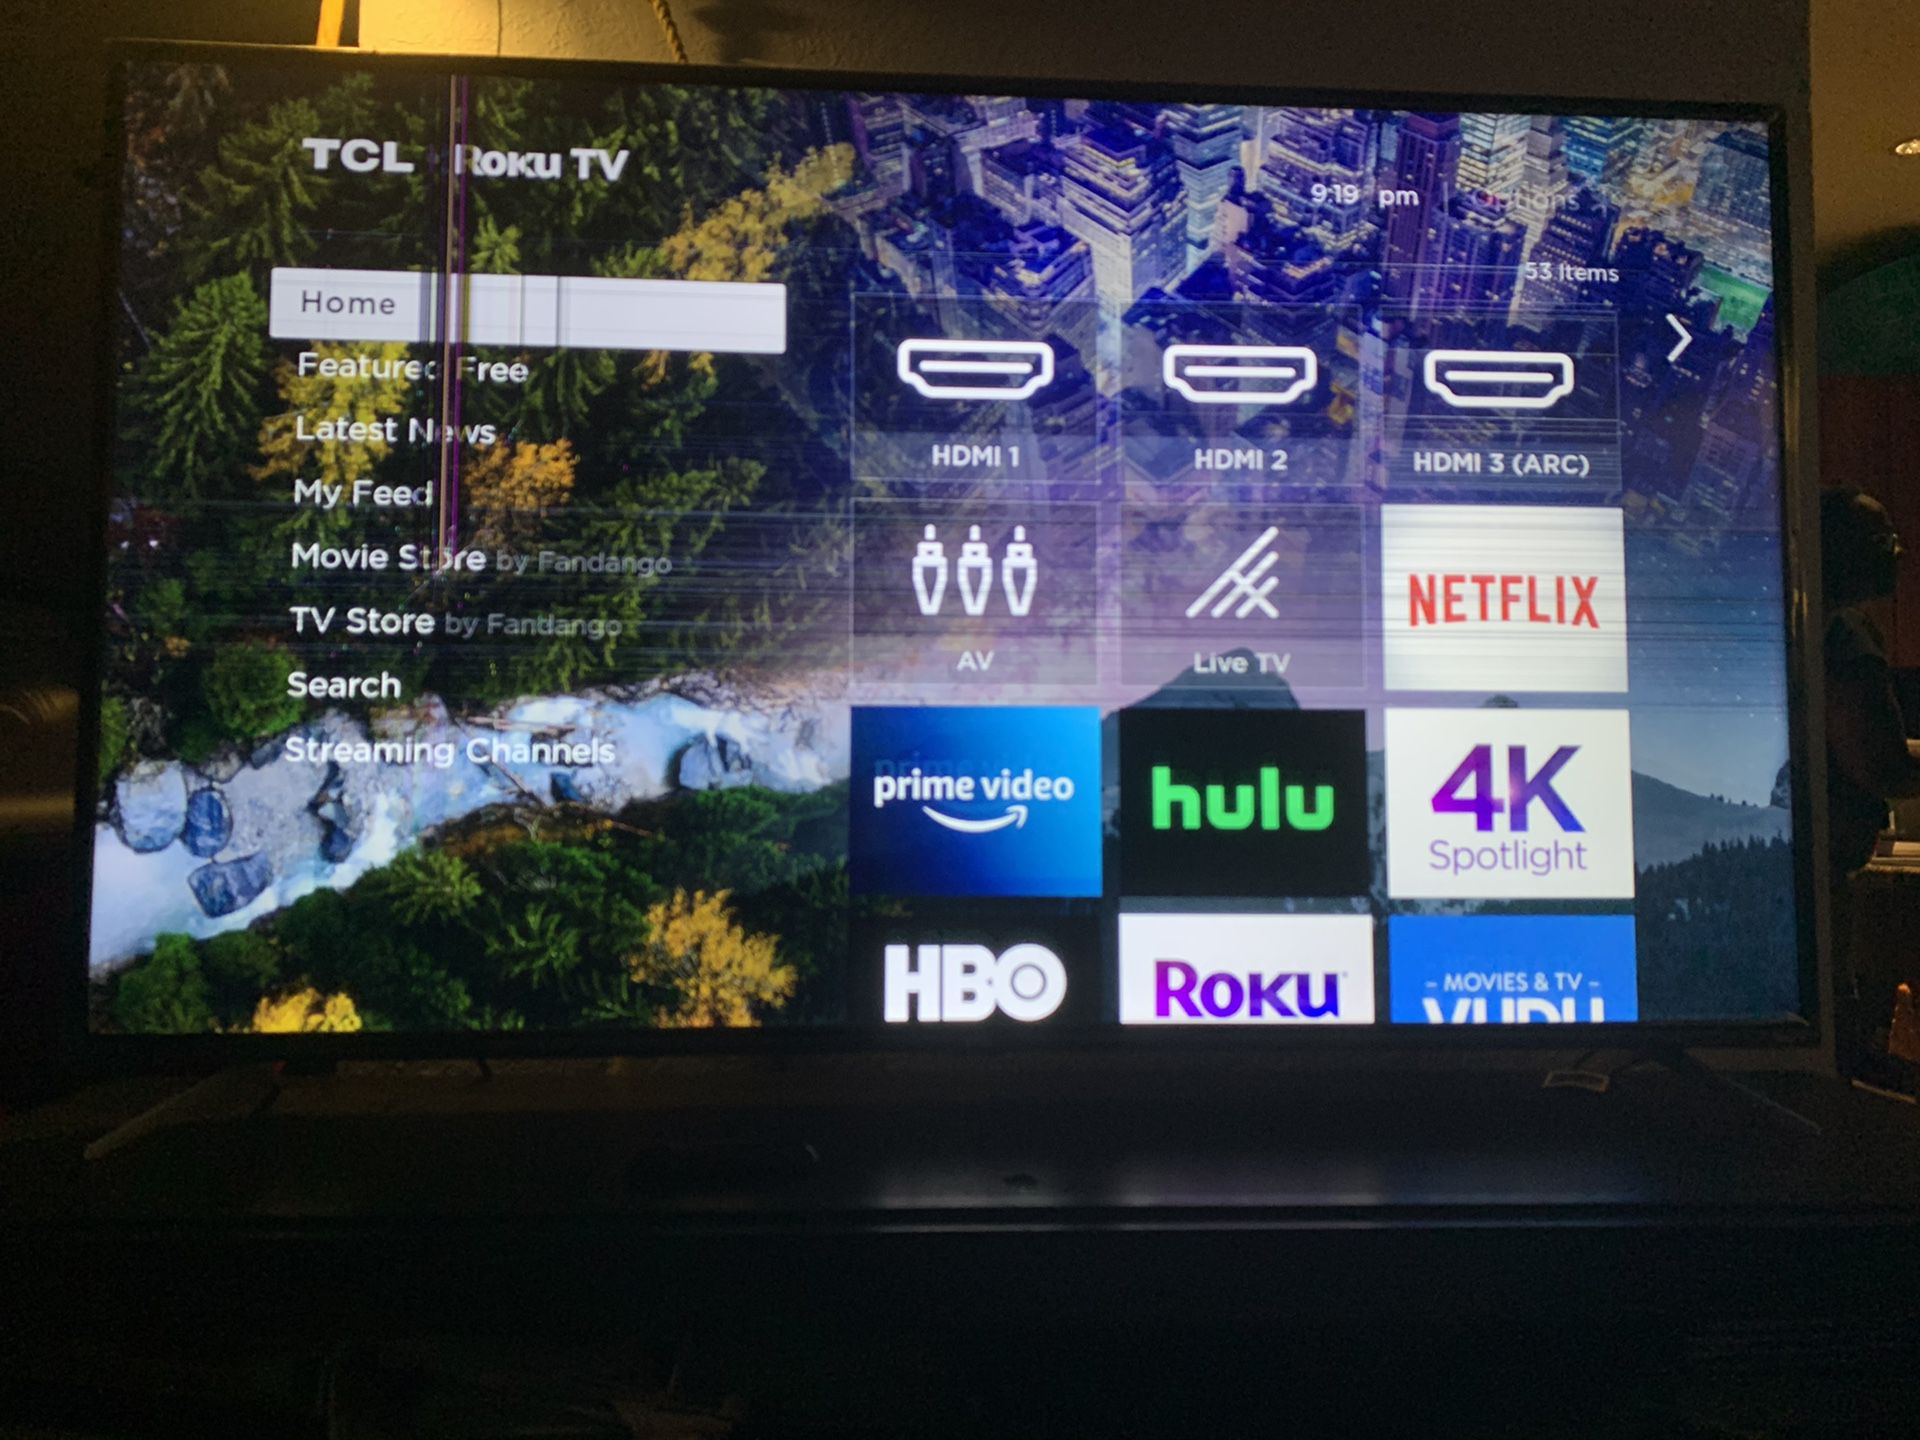 TCL-65 inch LED Smart TV *Has Lines*